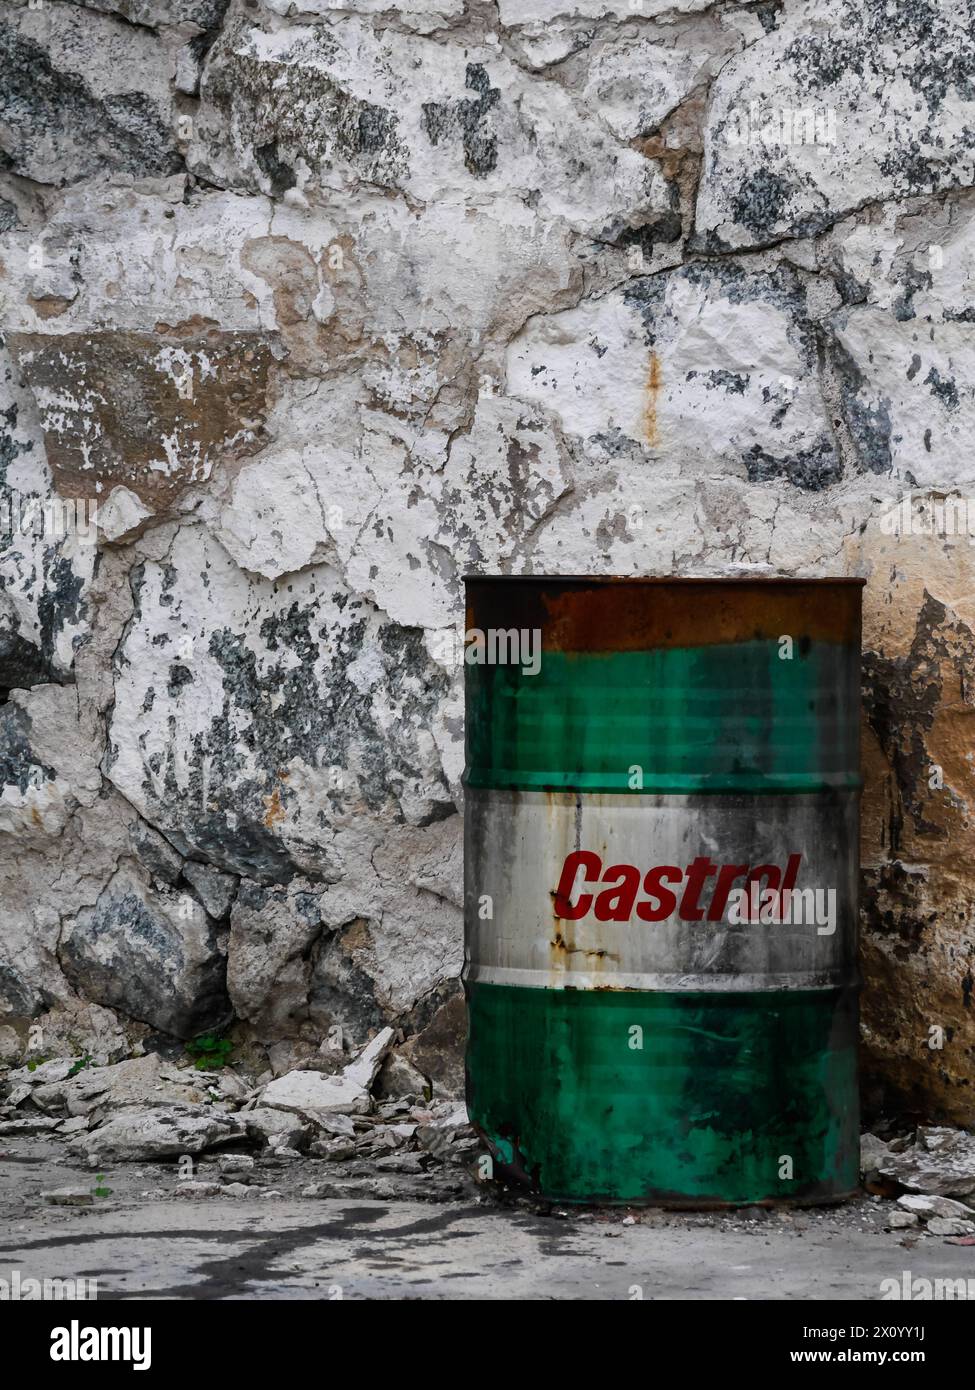 Green and white oil barrel with red Castrol logo on white background, standing against a stone wall. Discoloured and tarnished by possible fire. Stock Photo